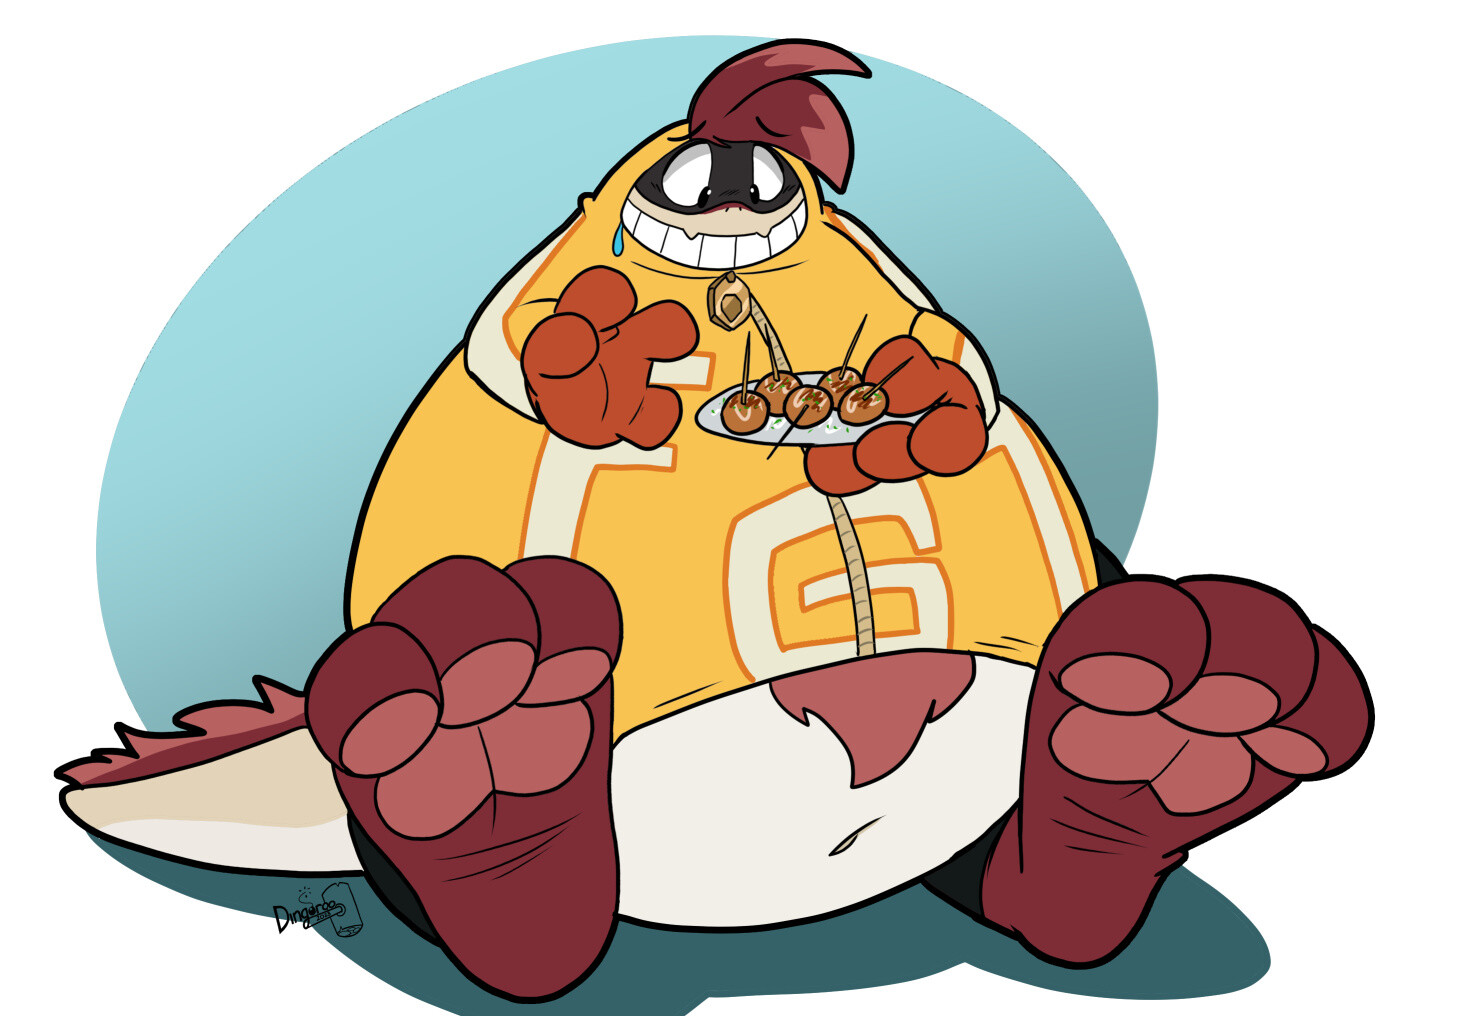 Levi the dragon, cosplaying as FatGum from My Hero Academia. He's salivating at a delicious plate of takoyaki. He's also very round.